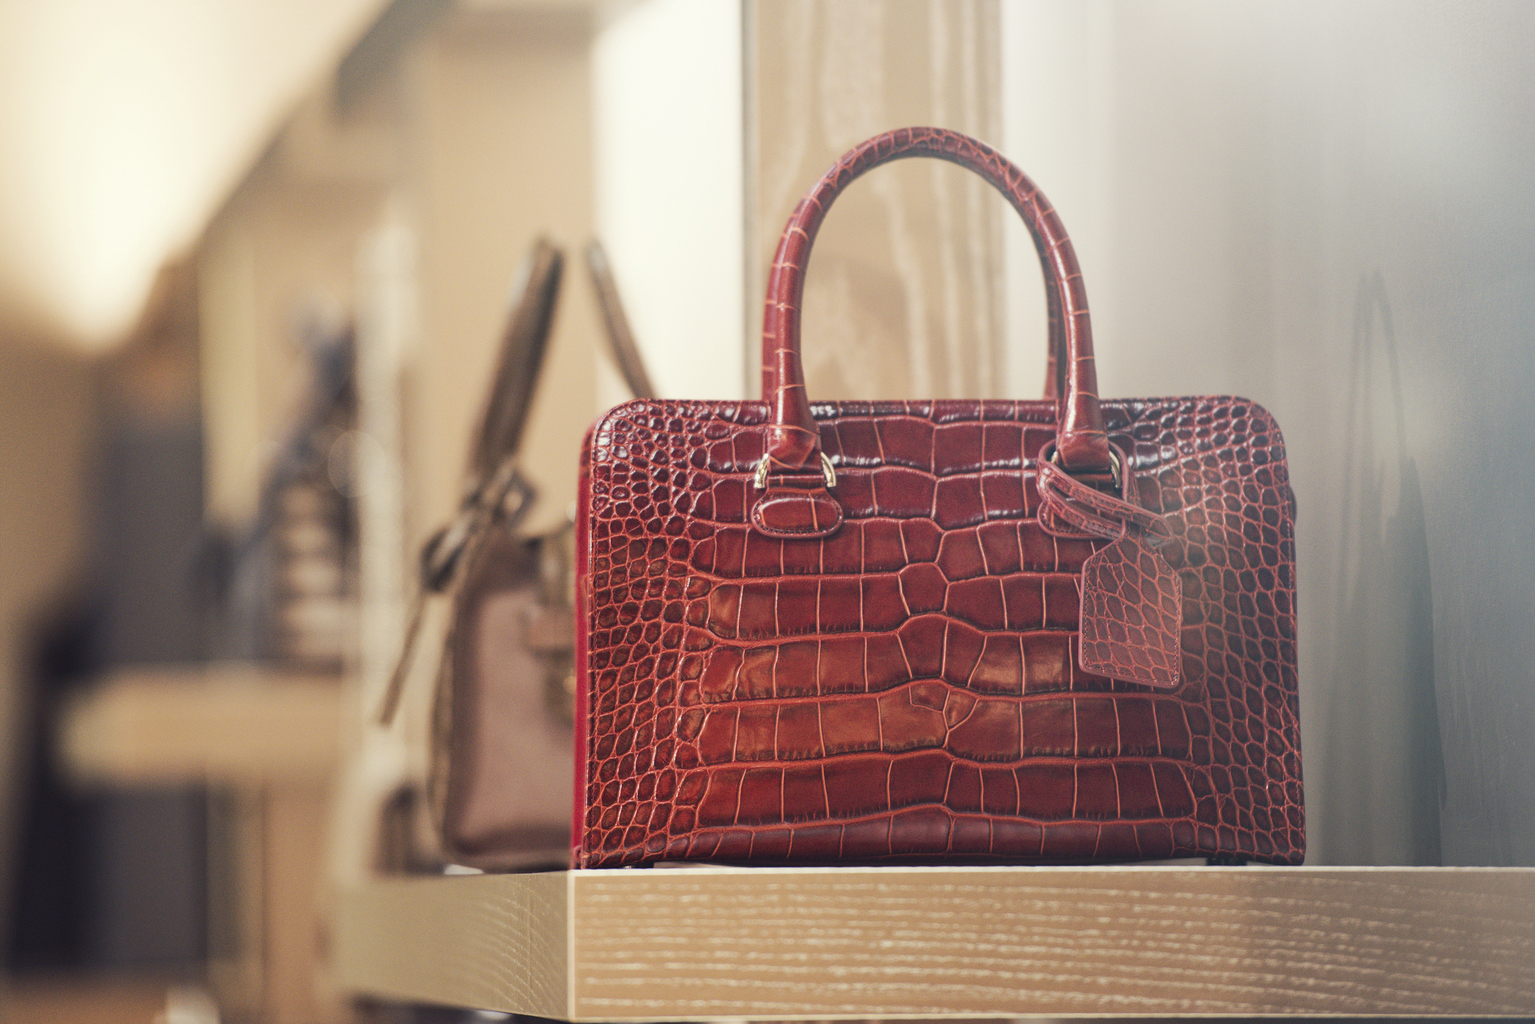 BAG AN ICON • Peruse an impressive selection of pre-owned designer